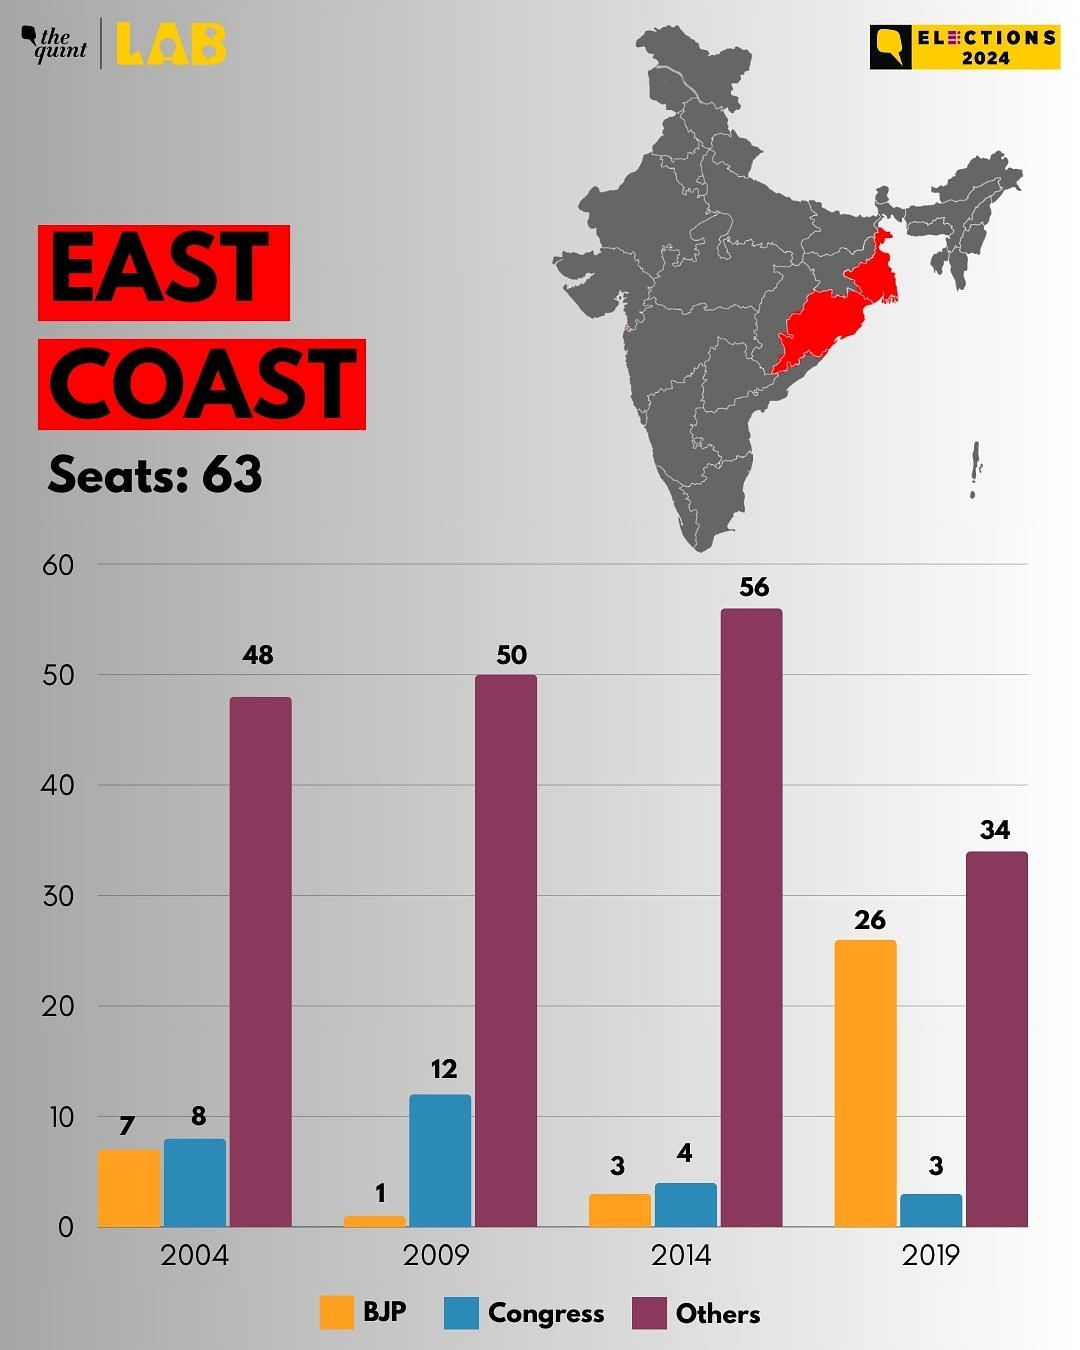 Take a look at the region-wise seat share of BJP and Congress from the past four Lok Sabha elections.